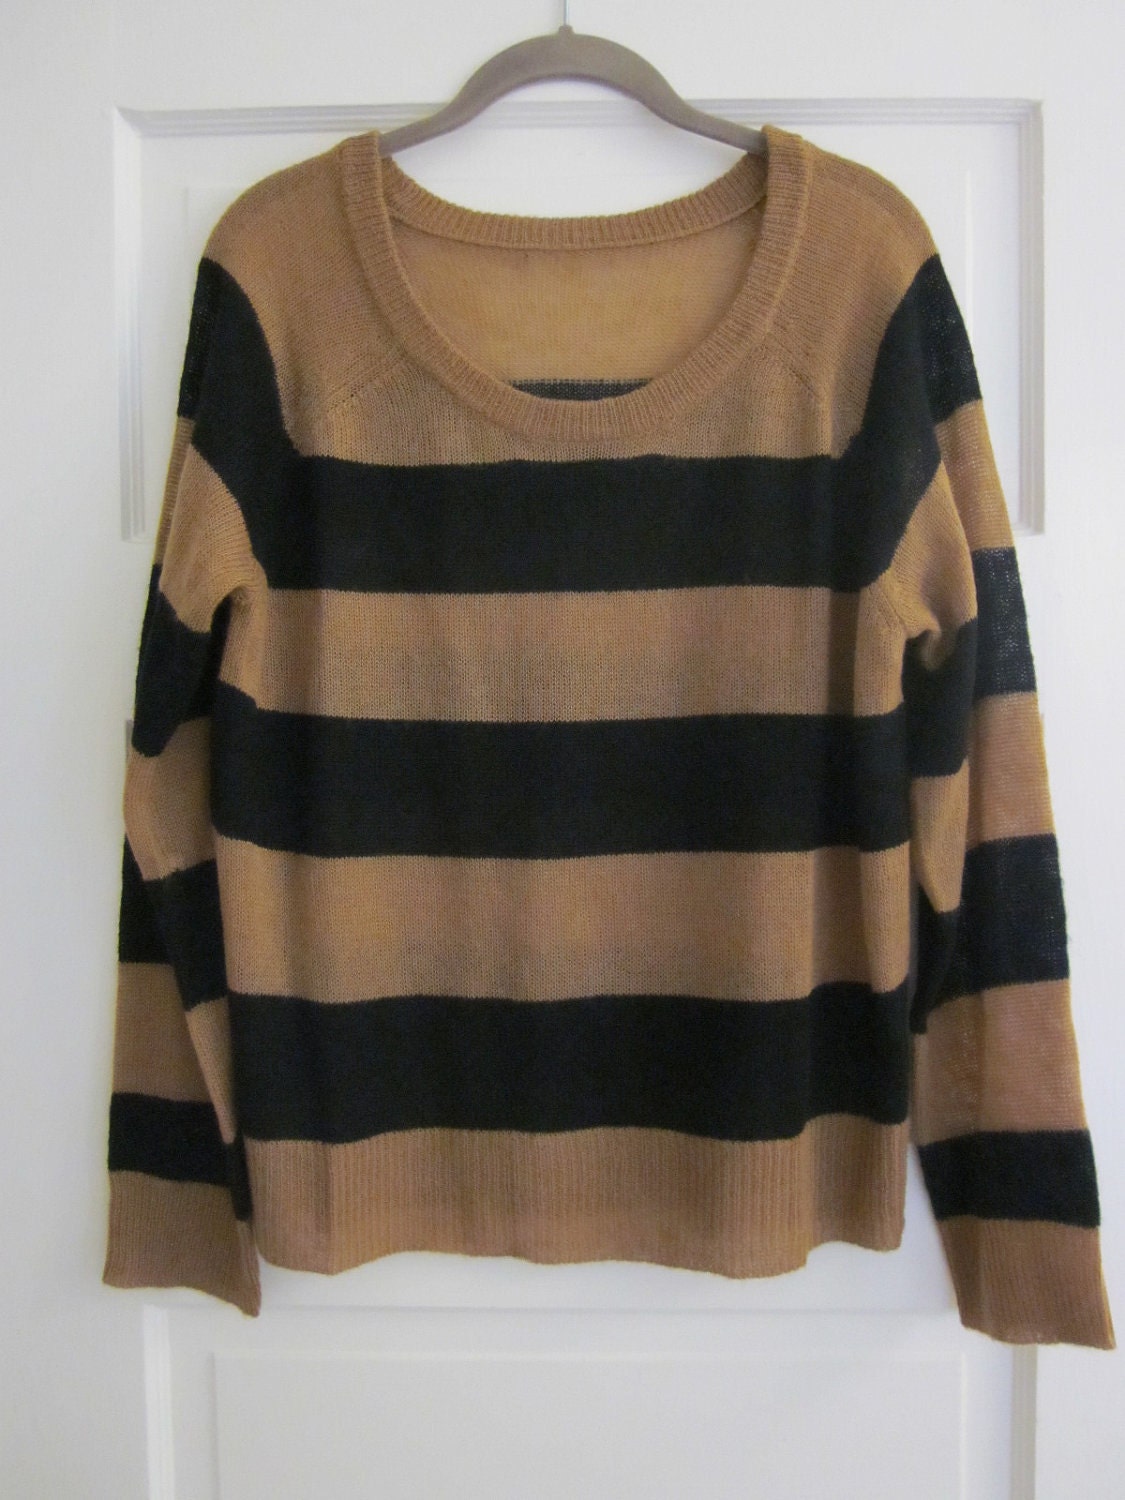 Brown and Black striped sweater sz. S/M/L by TheWitchingHour